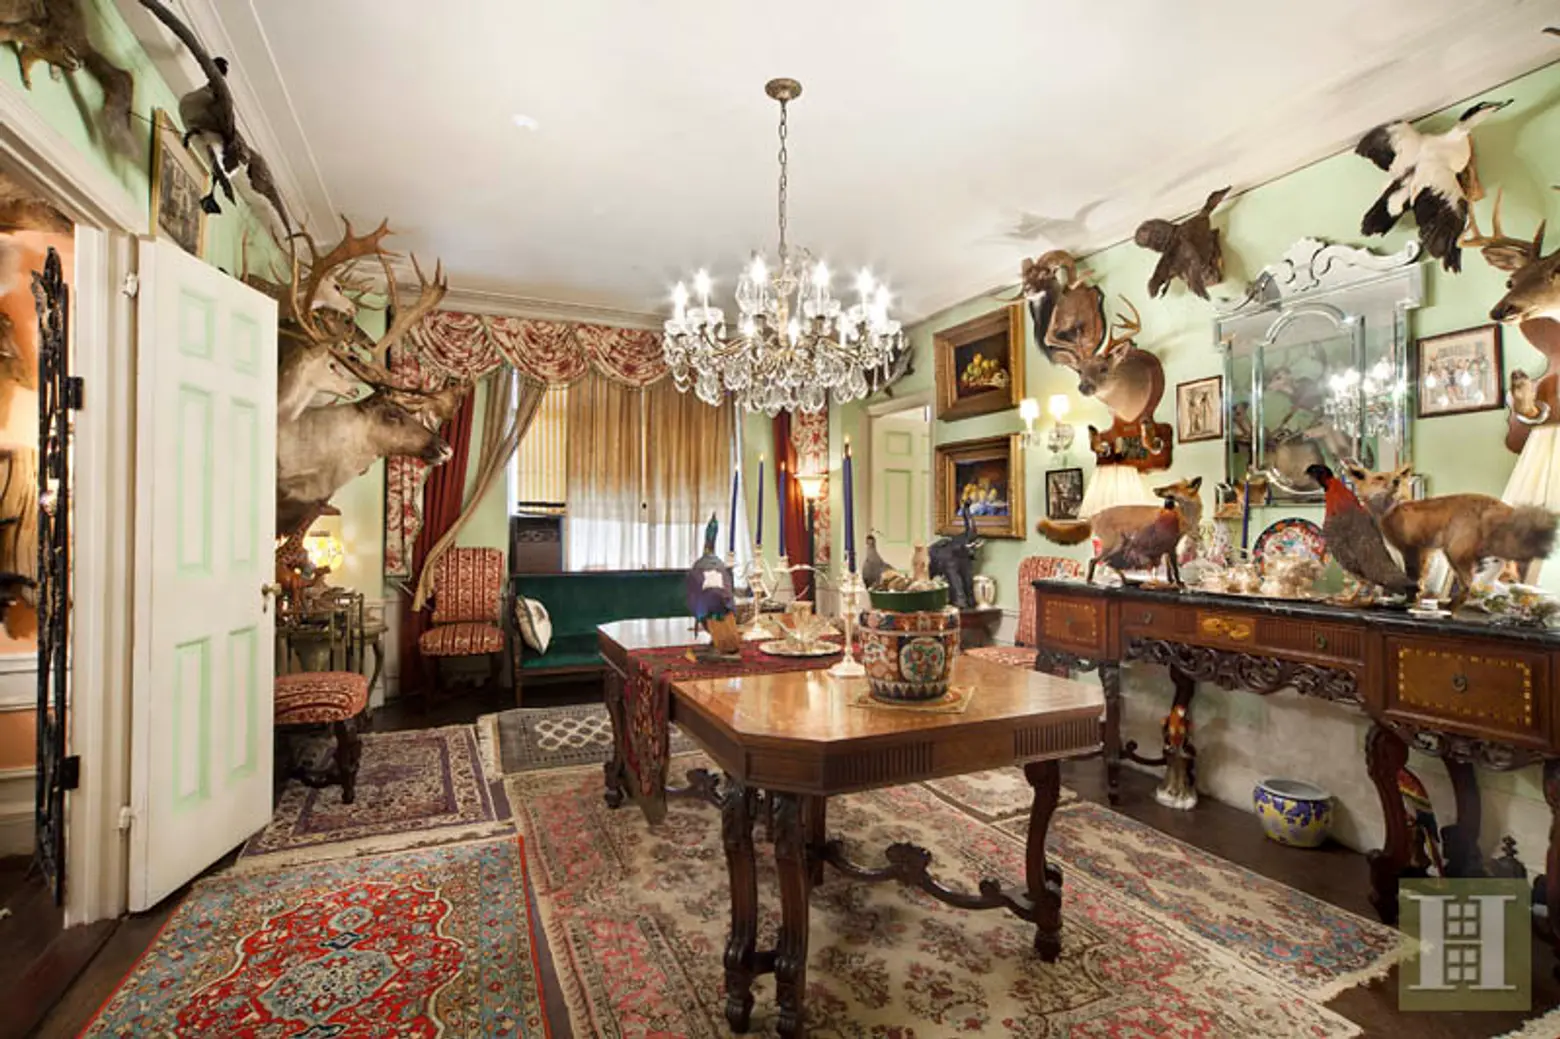 211 Central Park West, taxidermy apartment, apartment interior, with animals